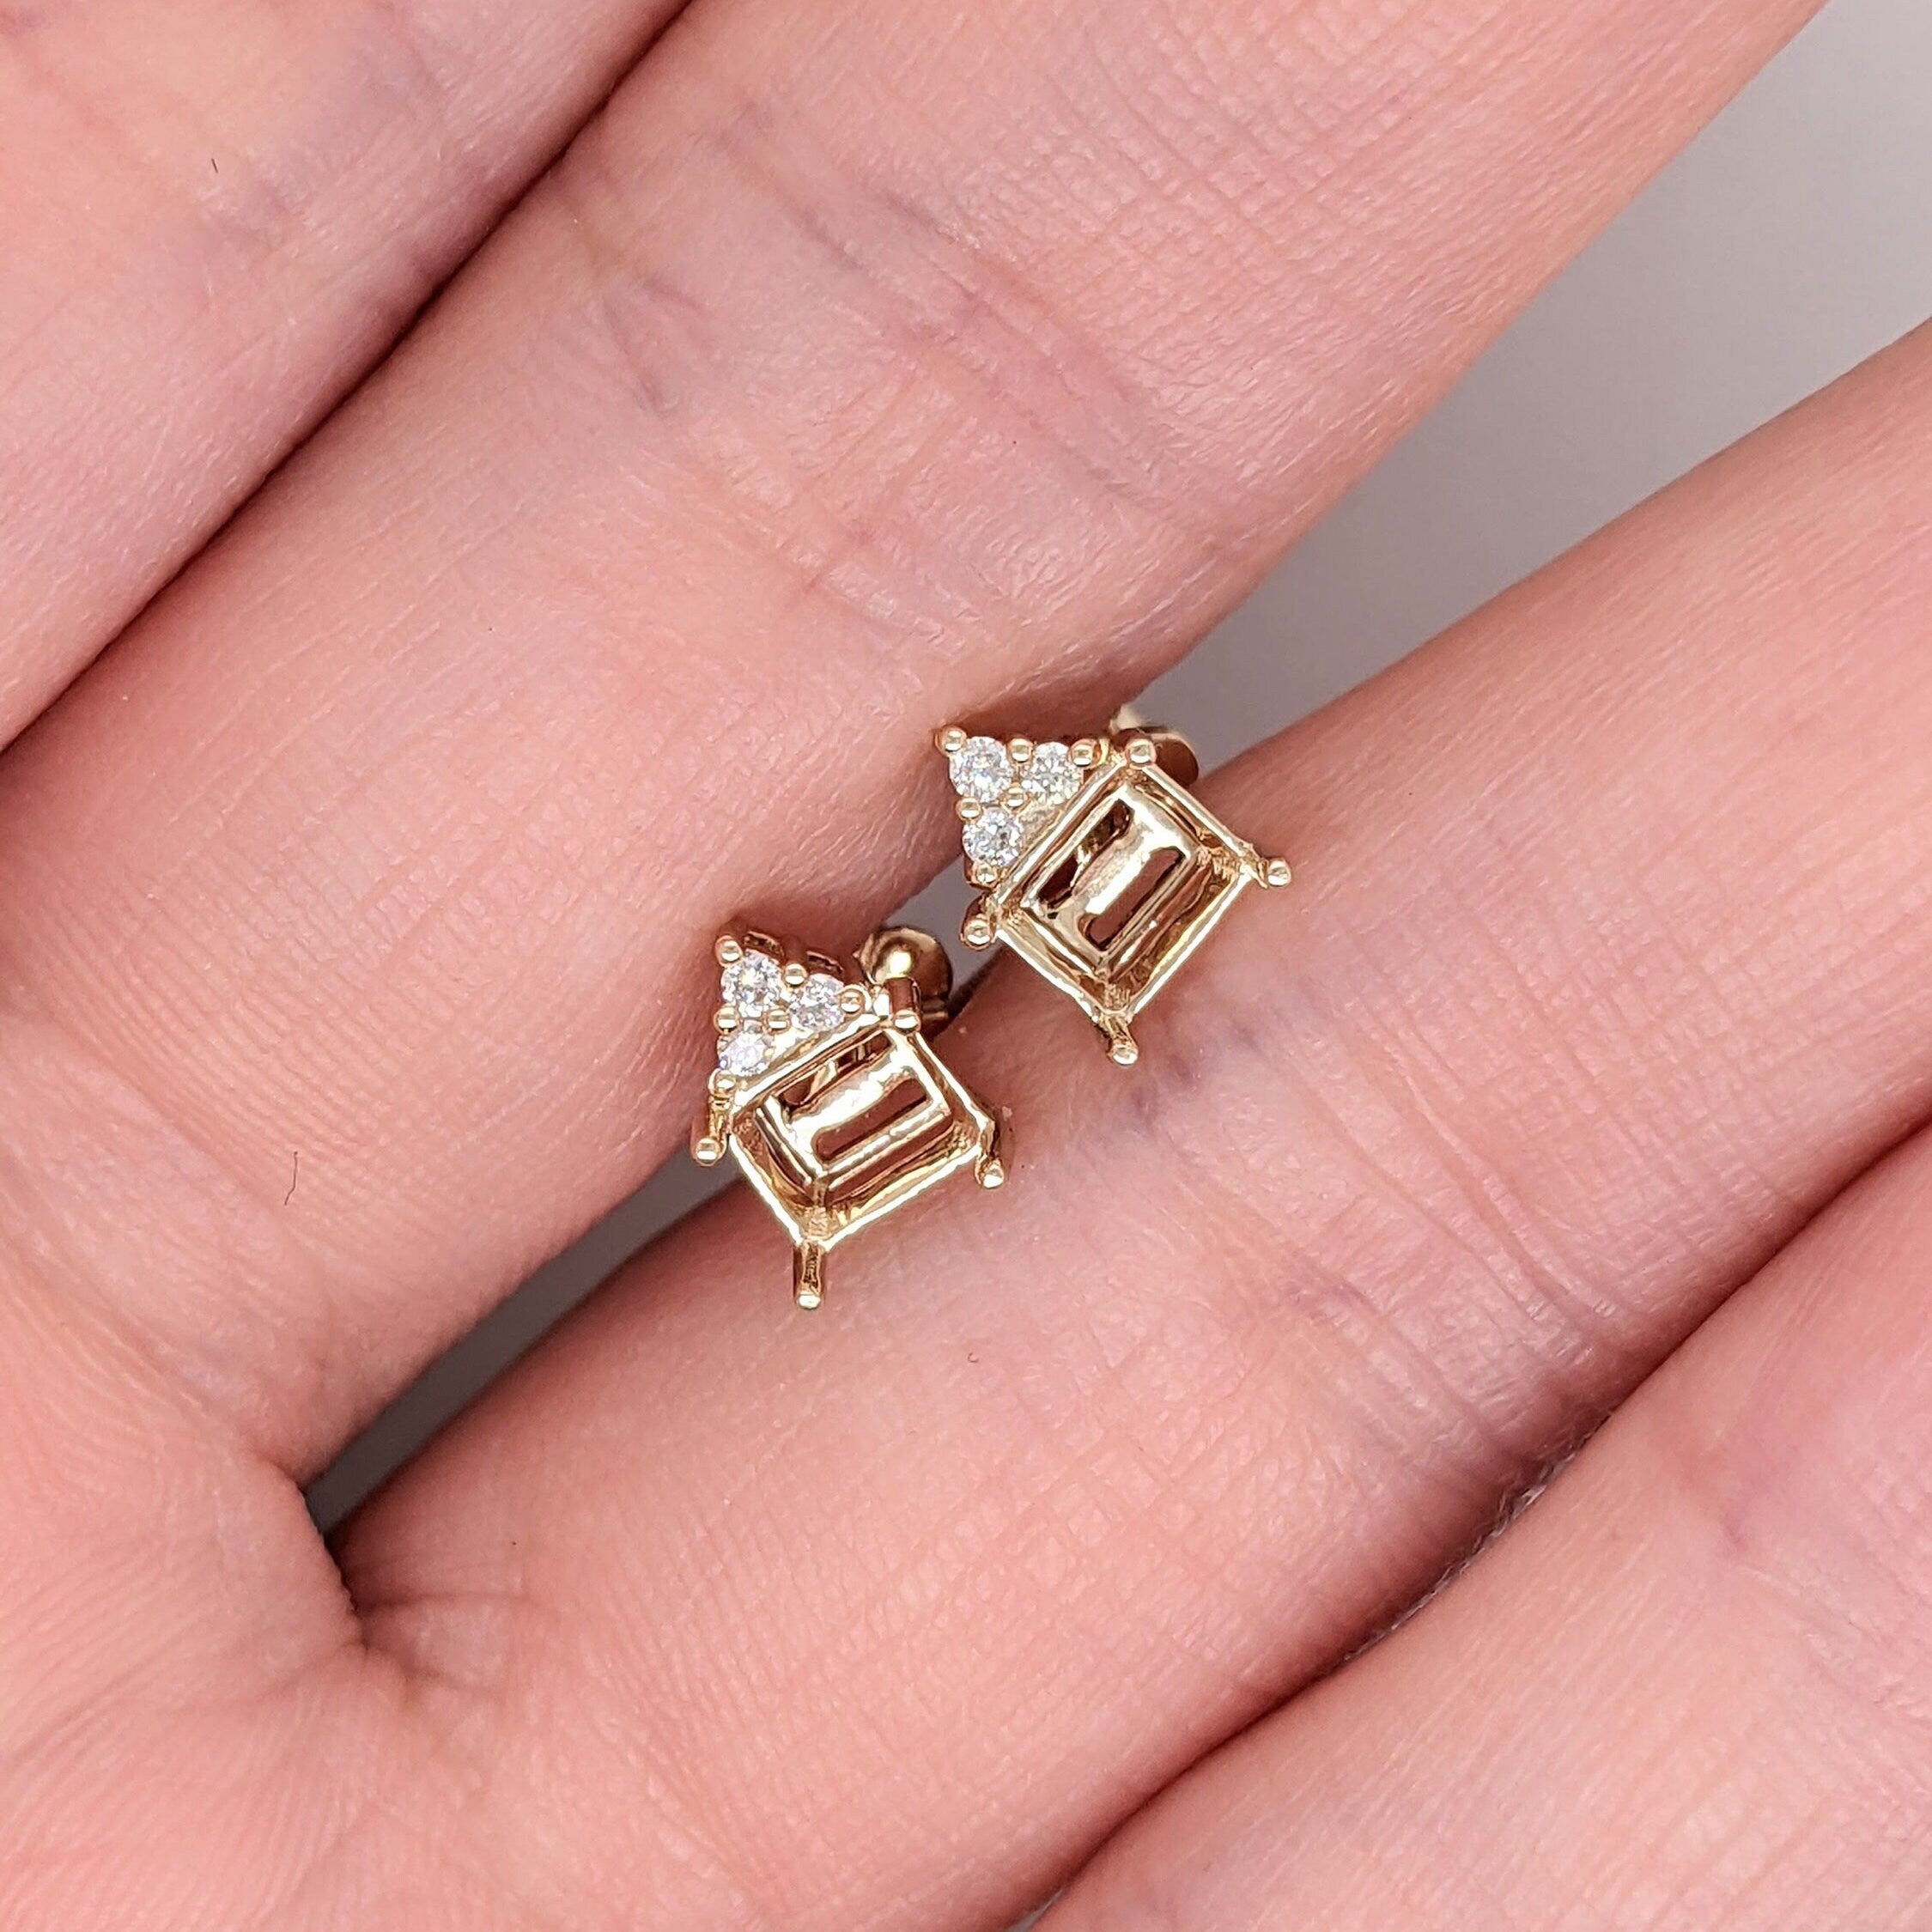 Stud Earrings-Cute Daily Wear Earring Stud Semi Mount in Solid 14K white, Yellow or Rose Gold with Natural Diamond Accents | Emerald cut 5x4mm | East West - NNJGemstones